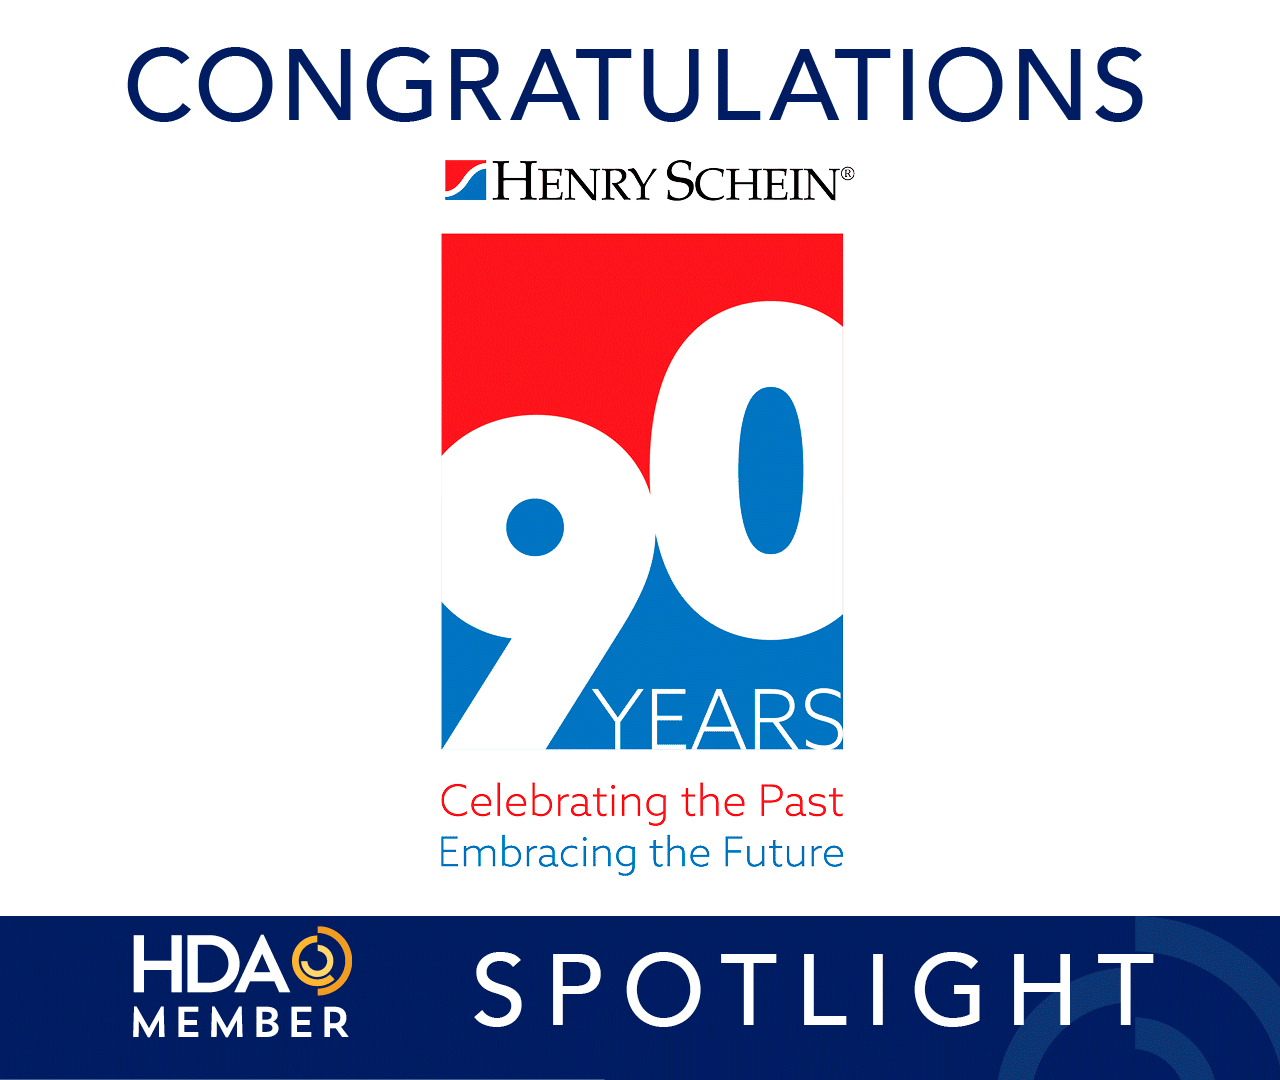 Member Spotlight: Henry Schein Celebrates 90 Years Delivering Healthcare Solutions